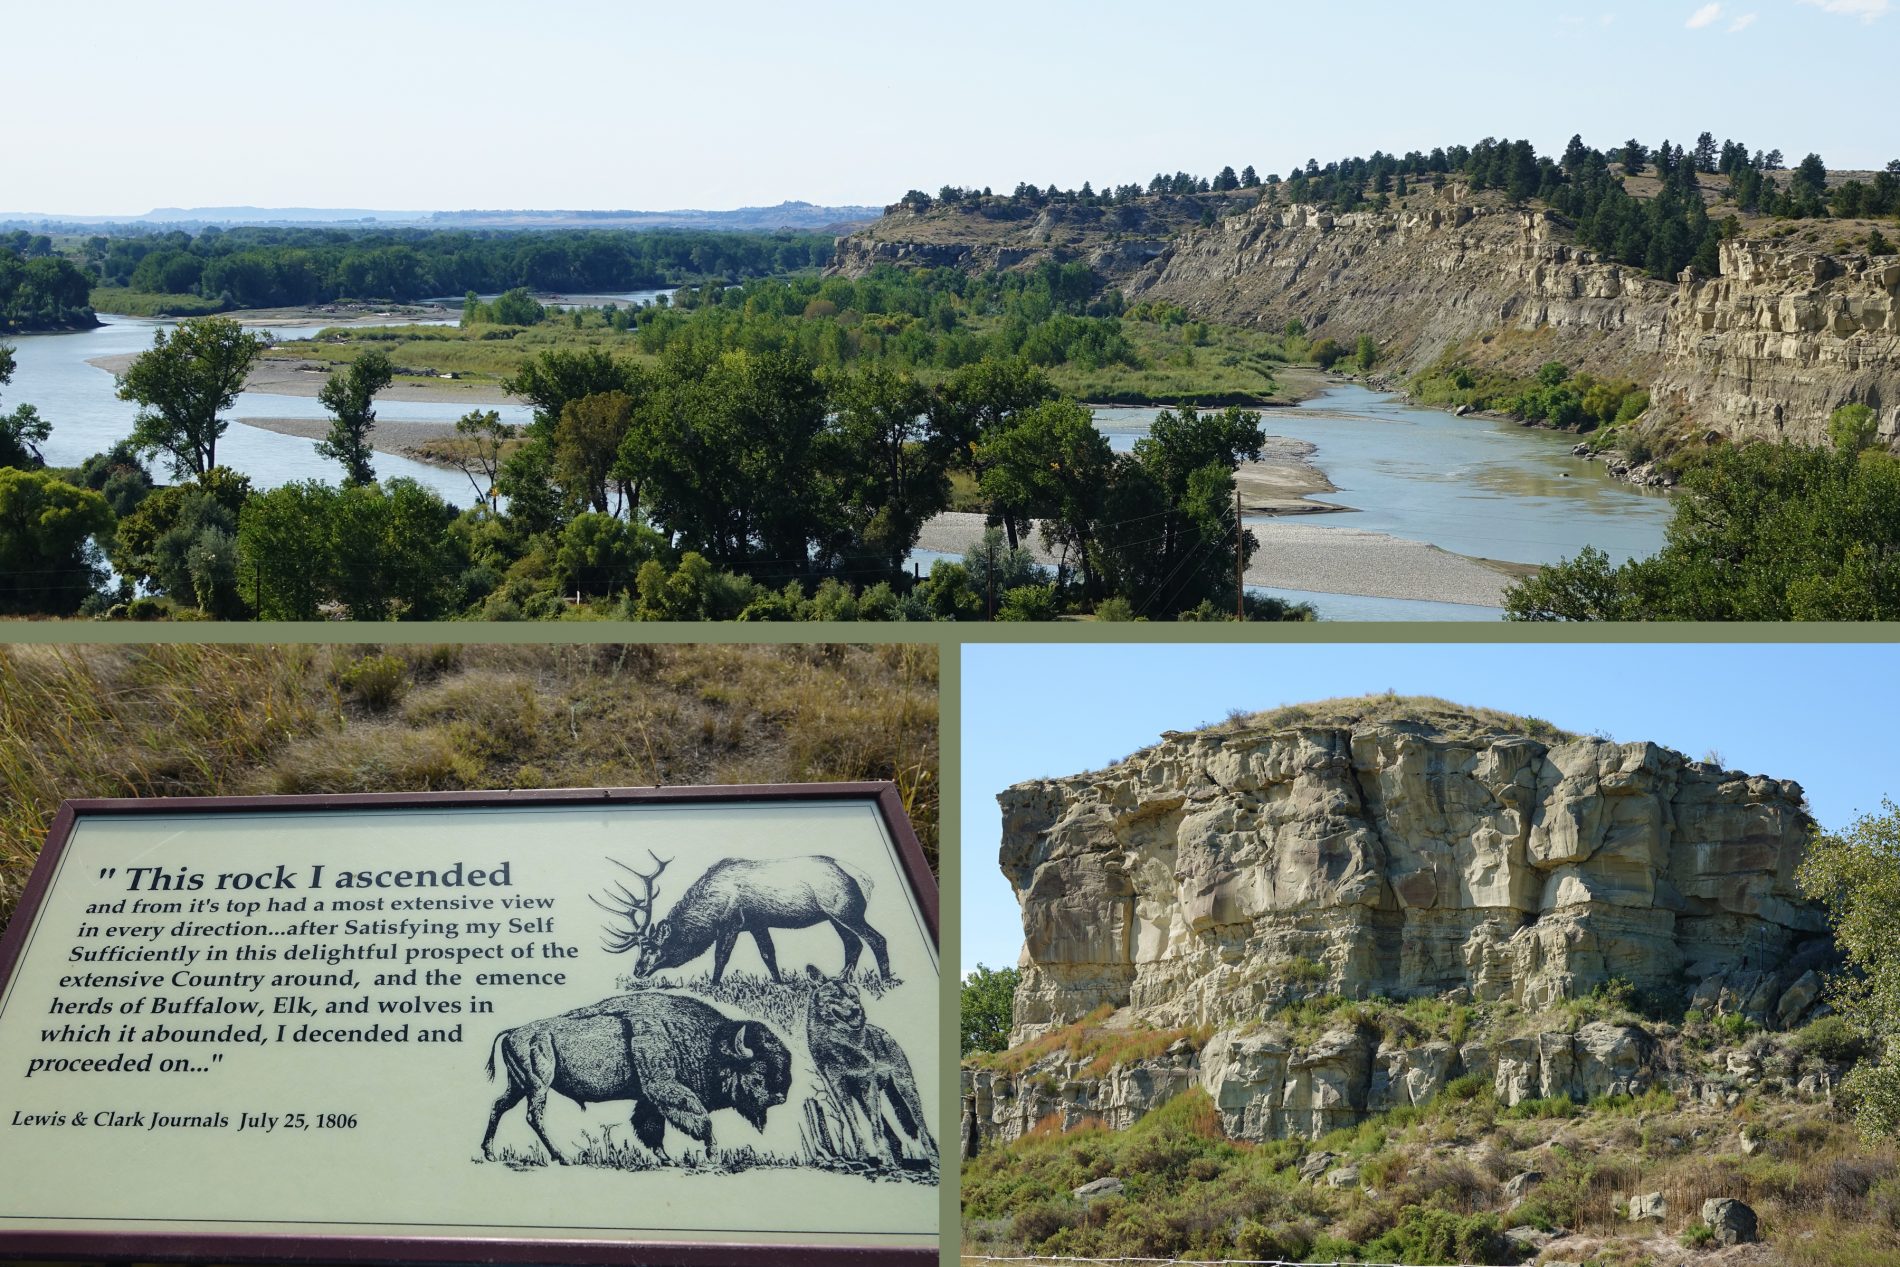 Pompey’s Pillar Montana is a nearly 200-foot two-acre section of rim rock overlooking the Yellowstone River.